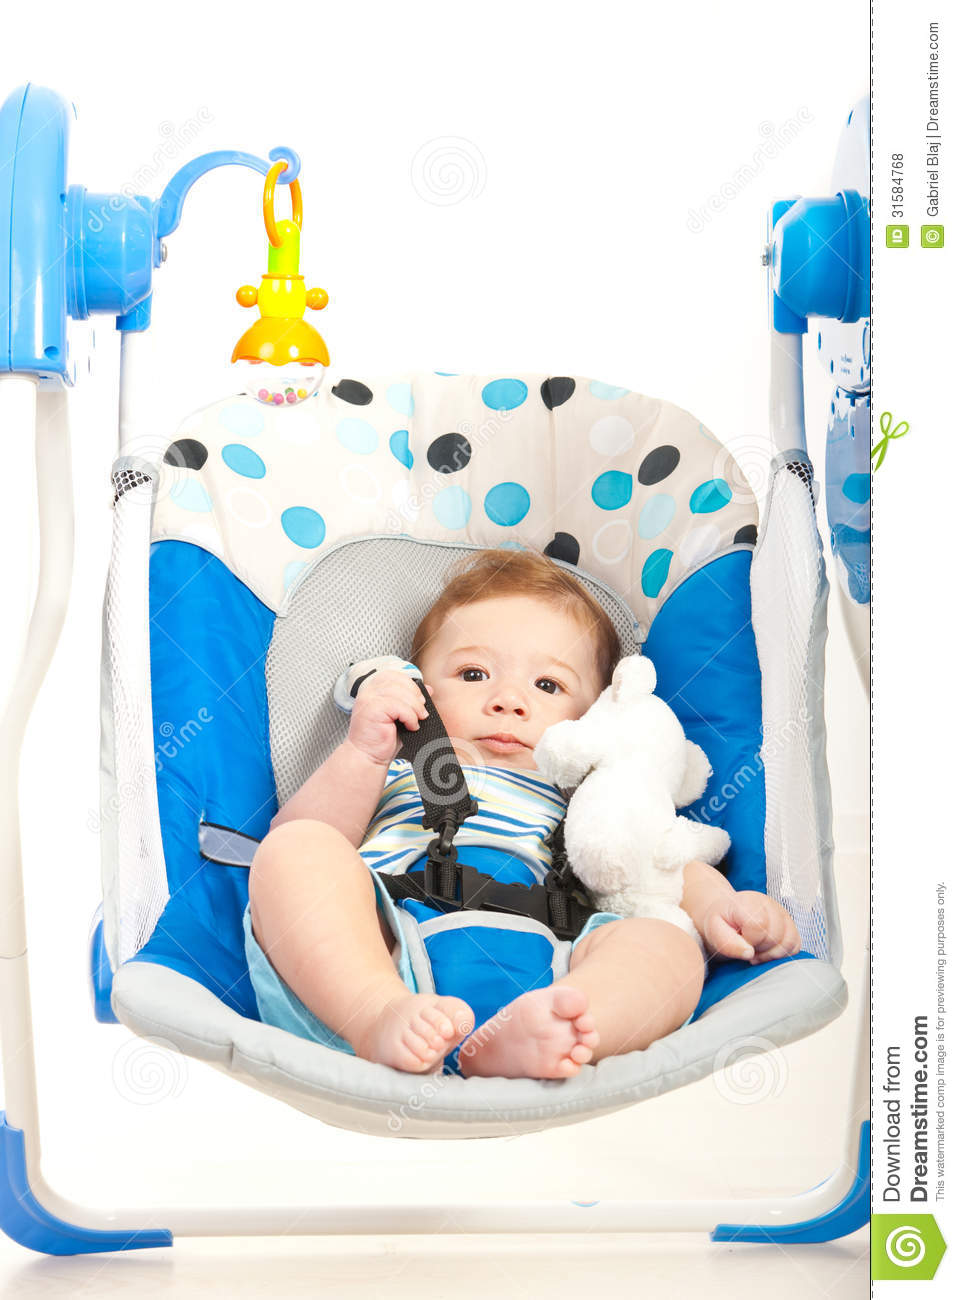 Quiet Baby In A Swing Royalty Free Stock Photos   Image  31584768